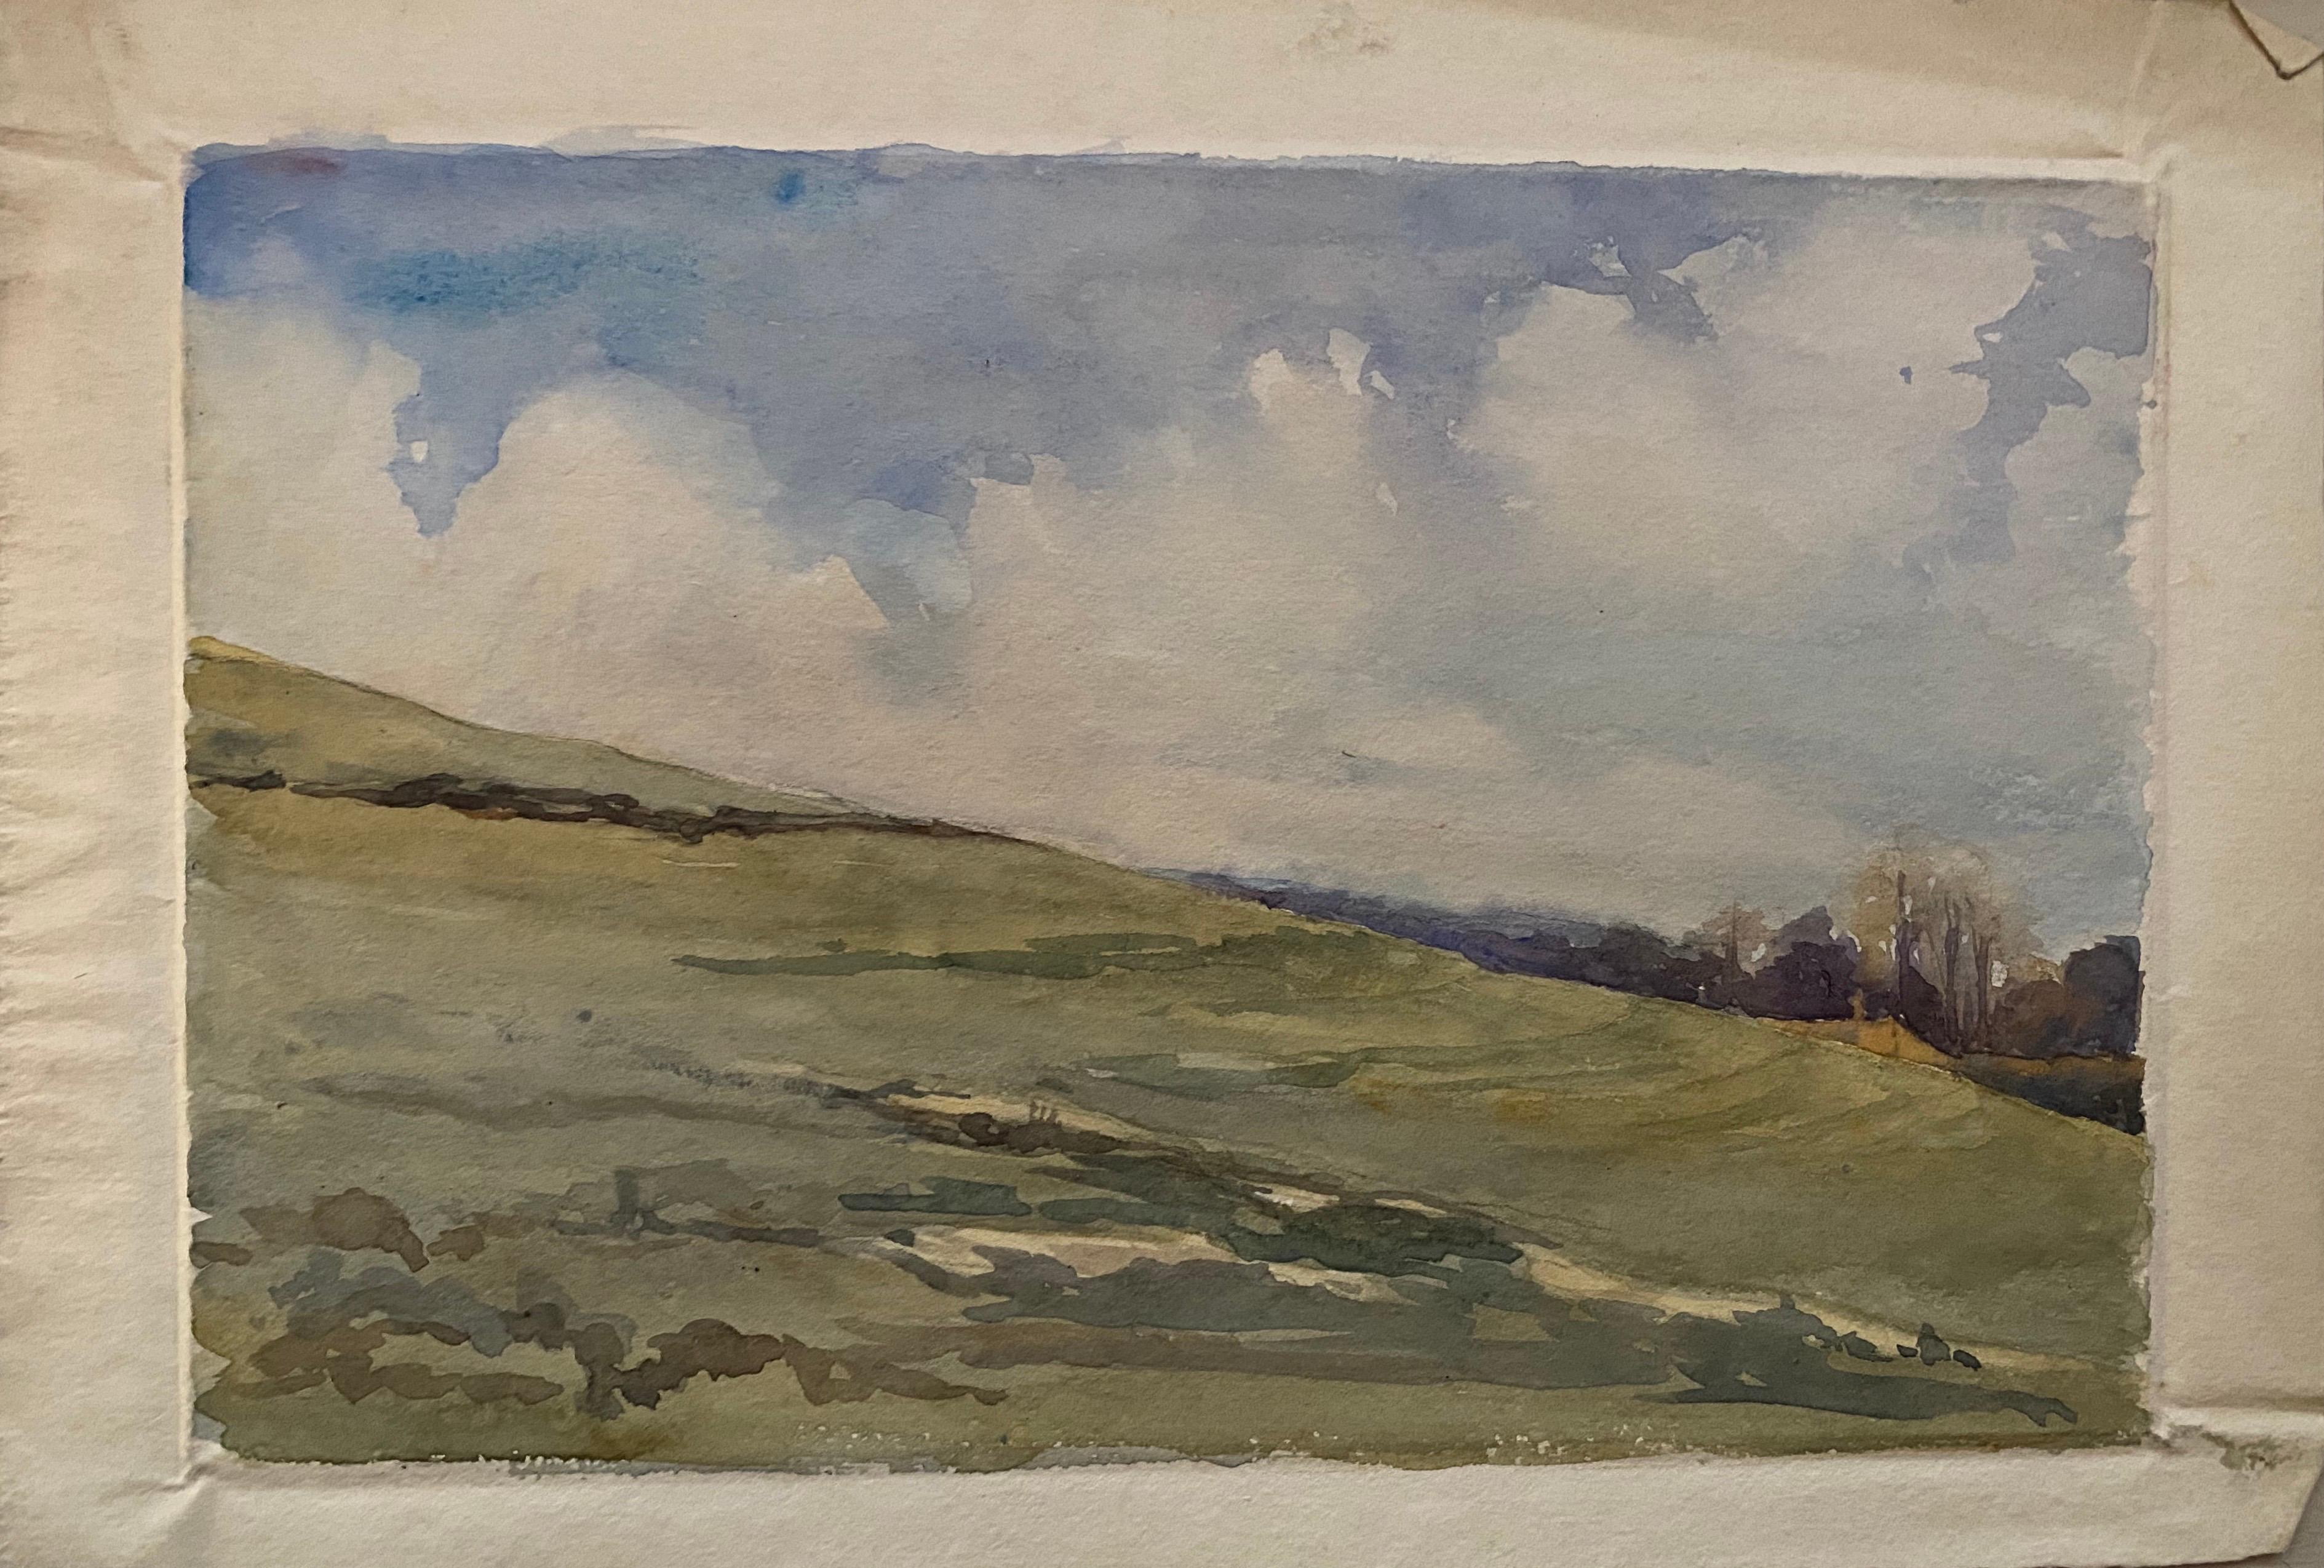 Cloudy meadow
English school, early 1900's
original watercolor painting on artists paper, unframed.
Overall paper size: 7.5x 11 inches.


From a large private collection of English watercolor paintings, all by the same hand, we offer this